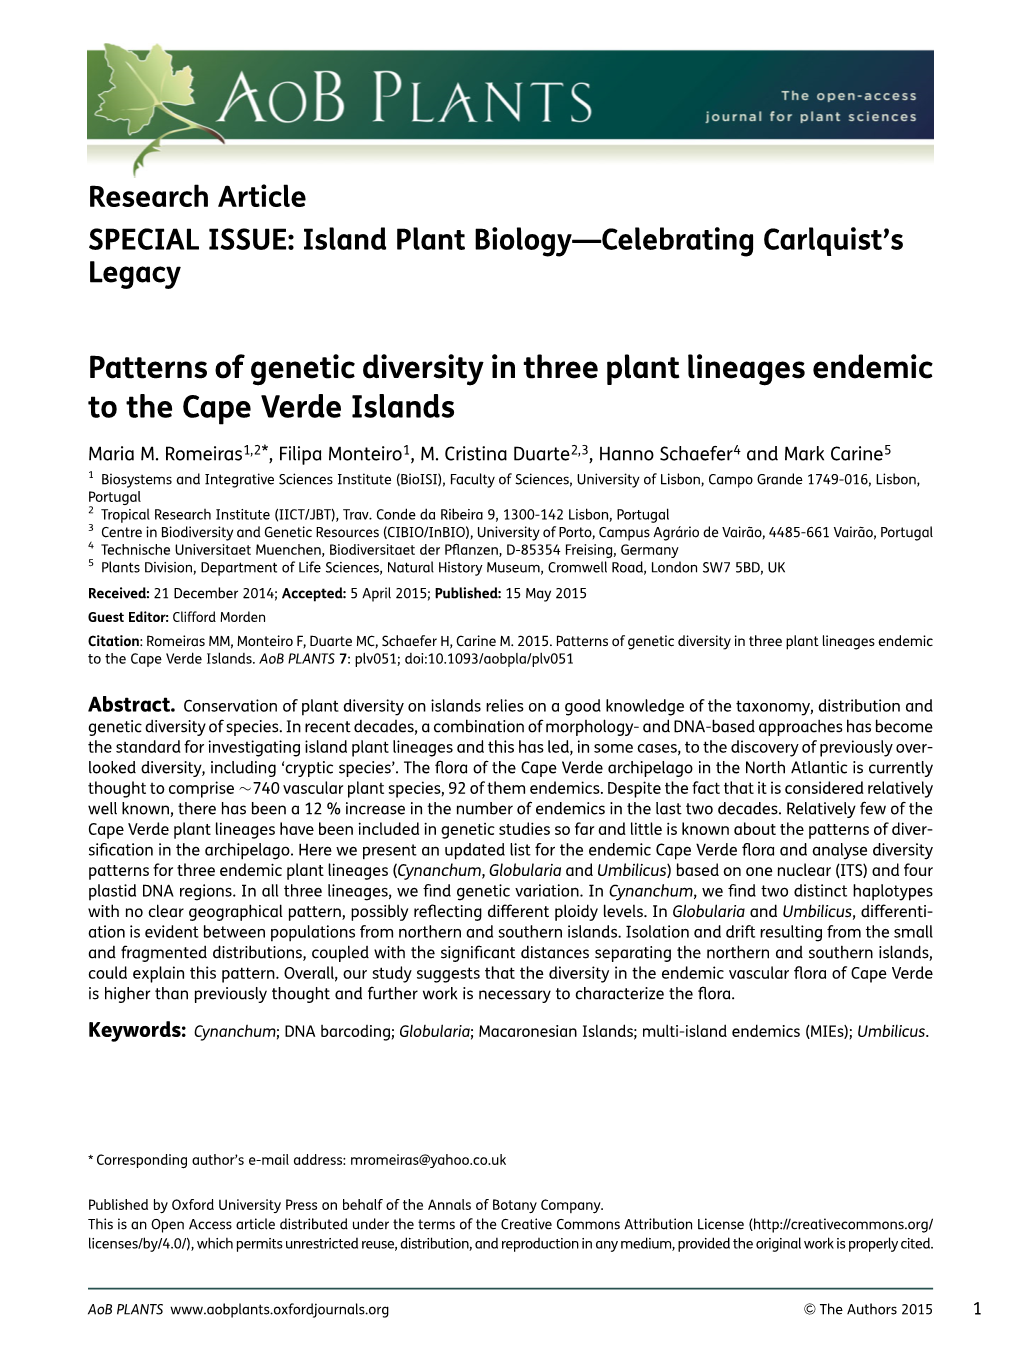 Patterns of Genetic Diversity in Three Plant Lineages Endemic to the Cape Verde Islands